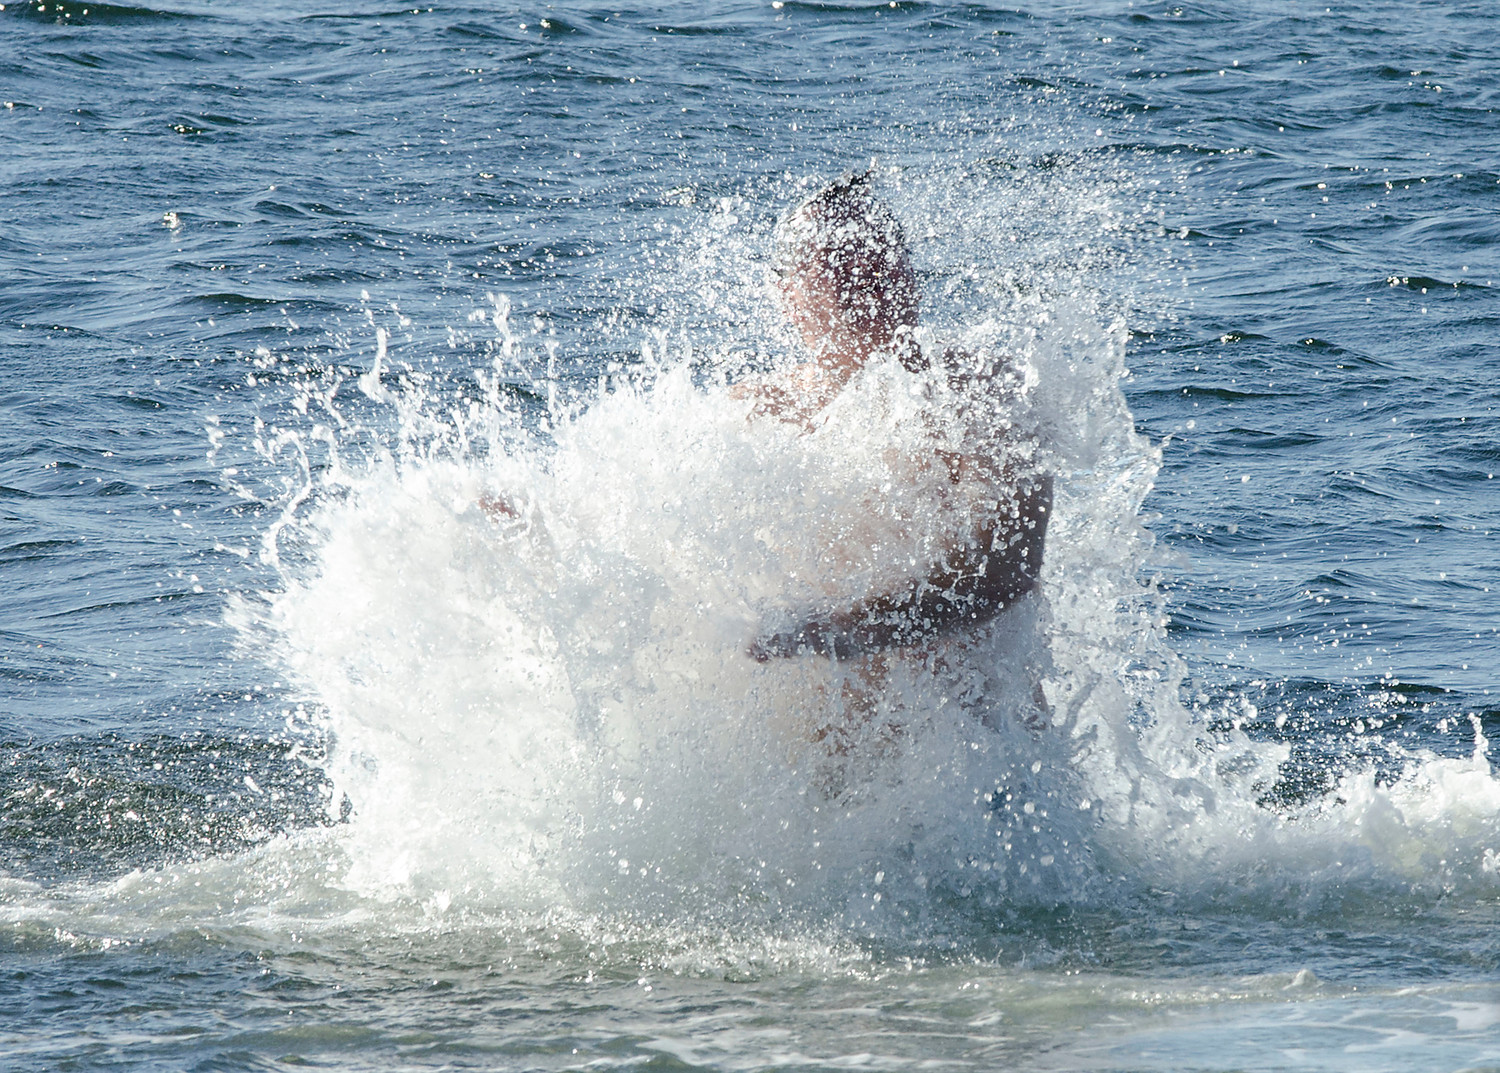 He burst into the air after fully submerging himself in the icy water.